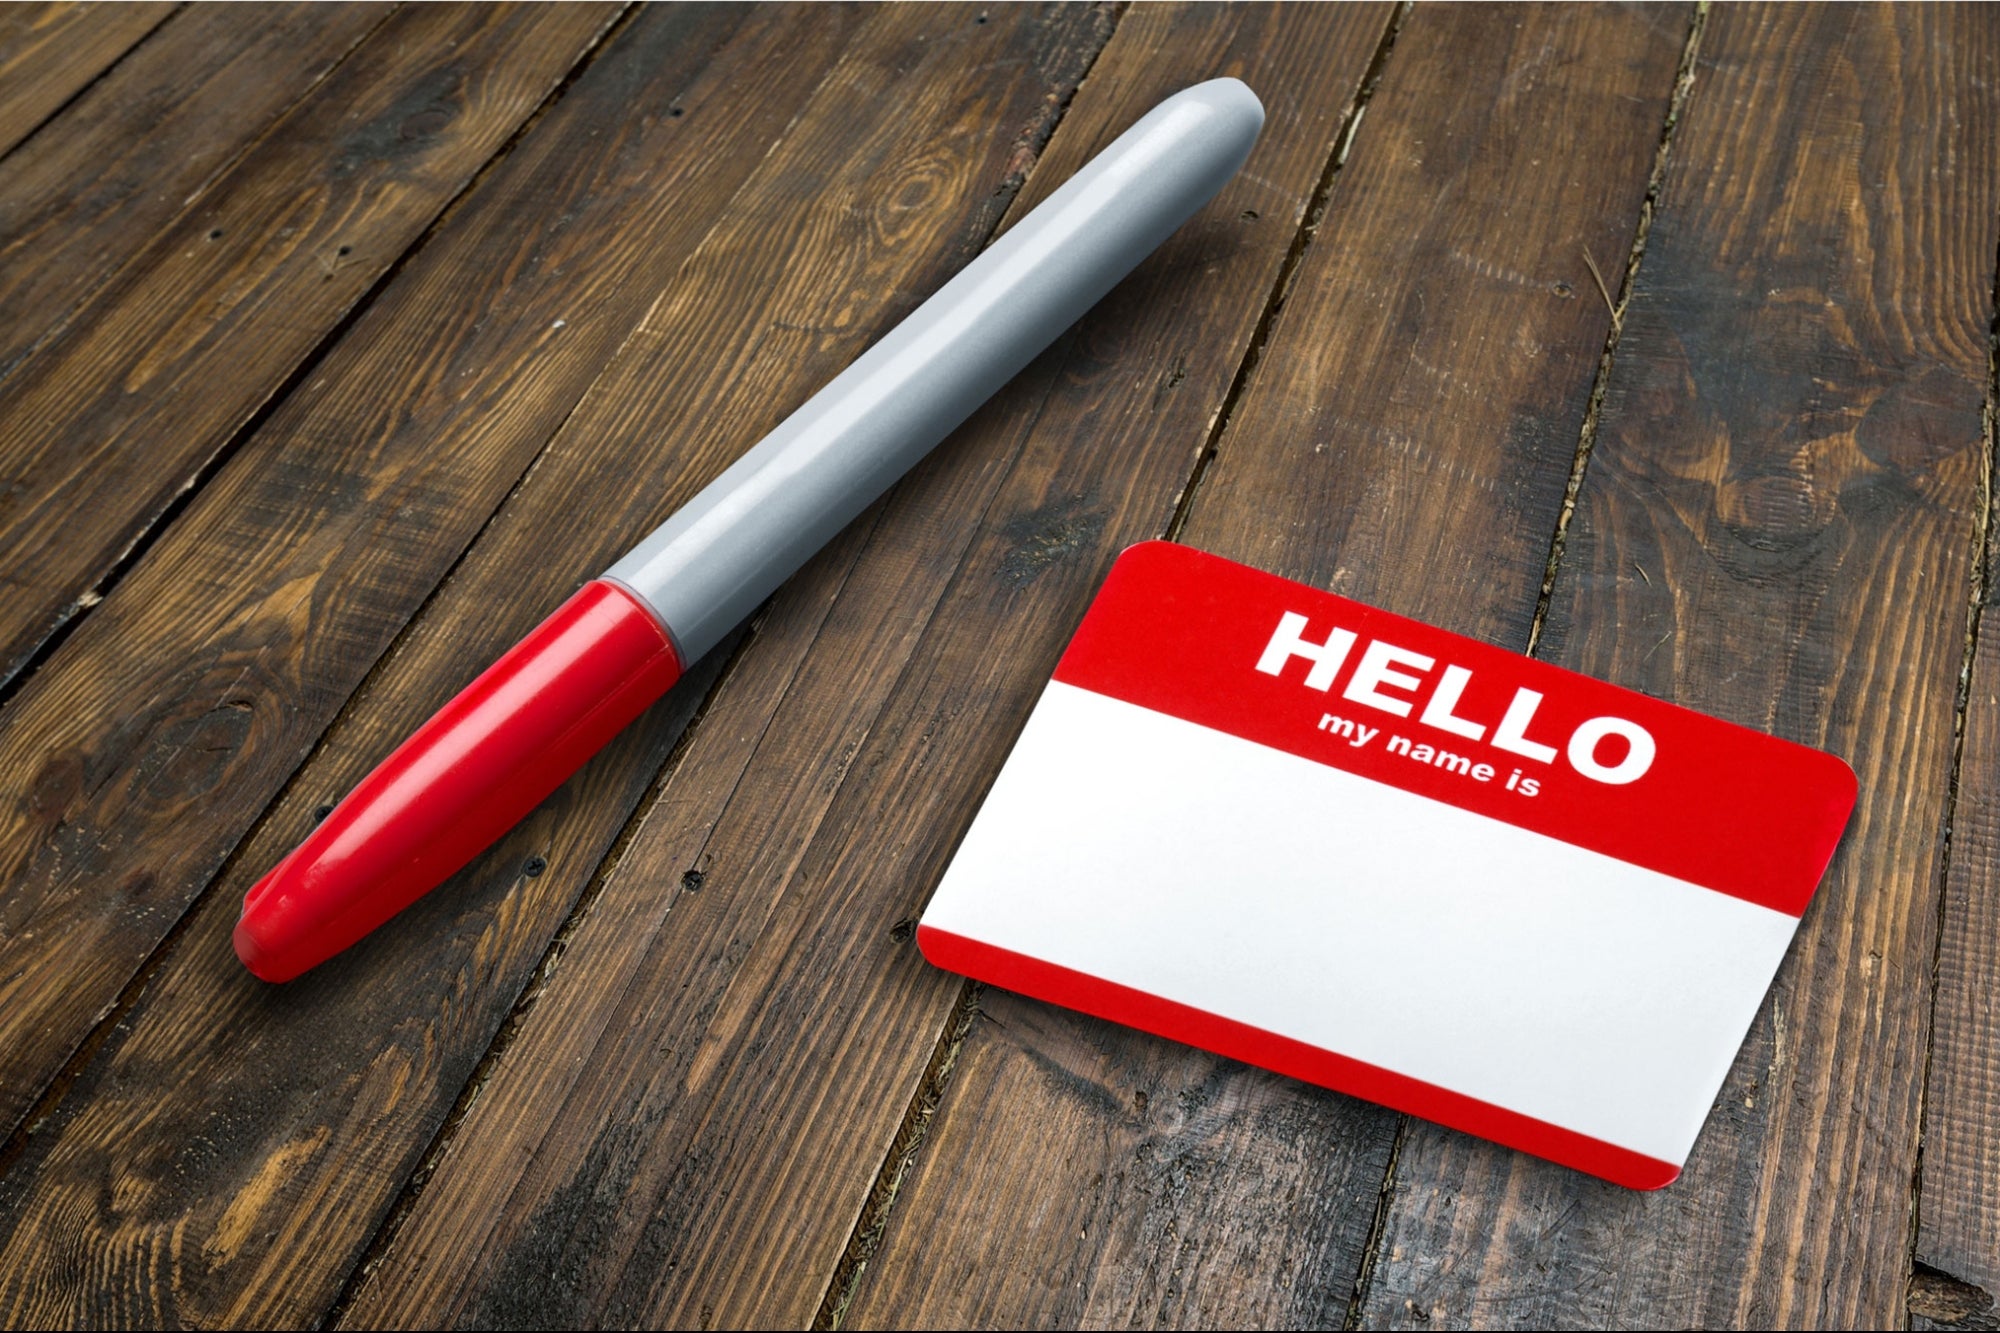 4 Clues to Help You Choose an Effective Business Name